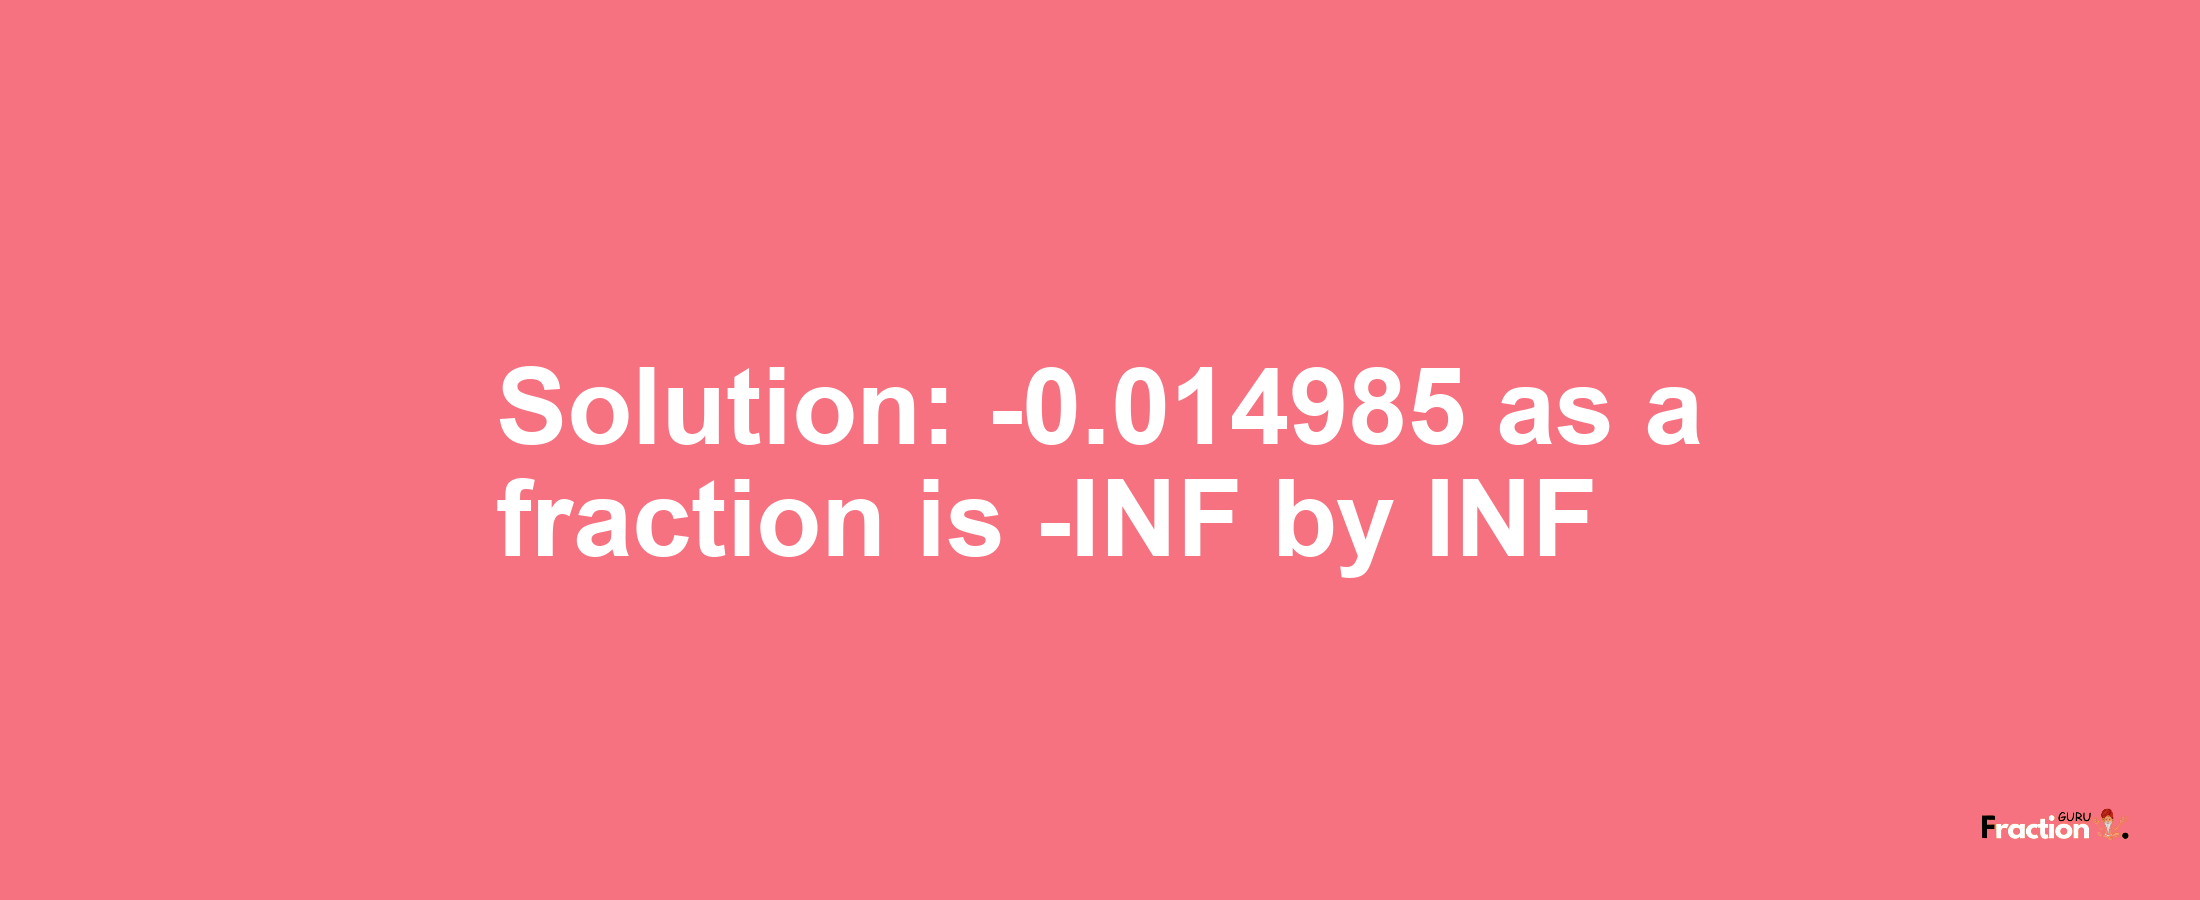 Solution:-0.014985 as a fraction is -INF/INF